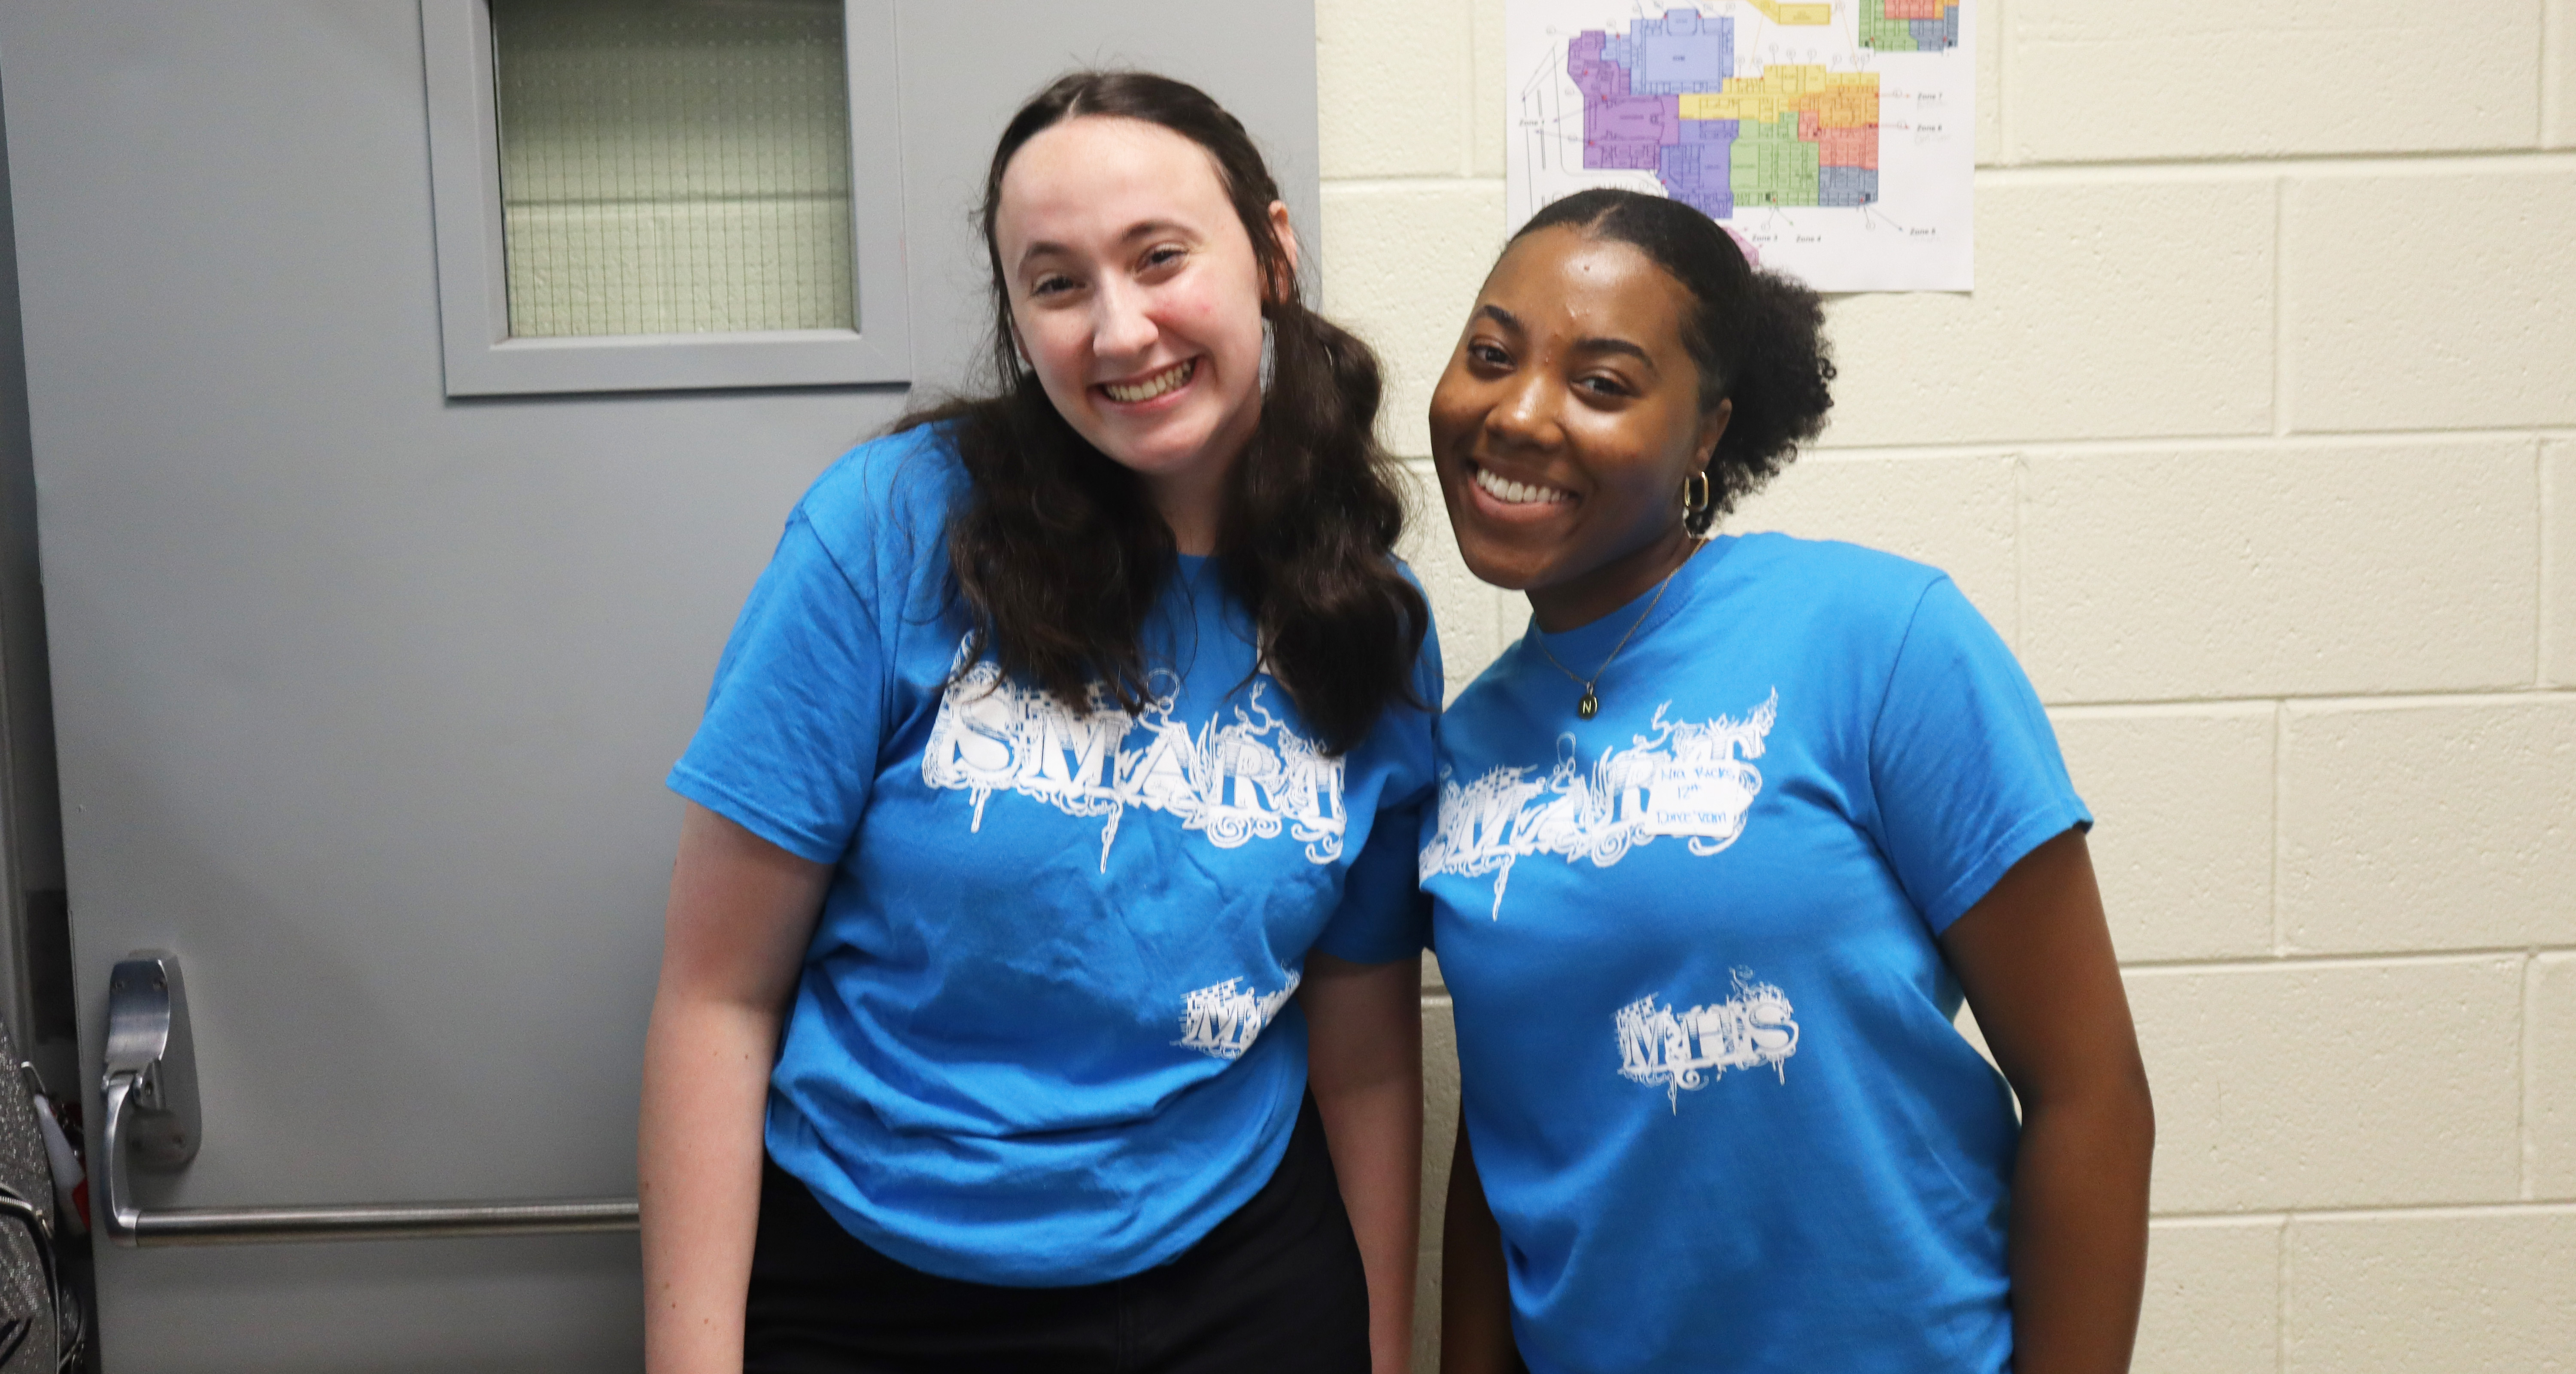 Two students wearing a blue shirt pose for a photo